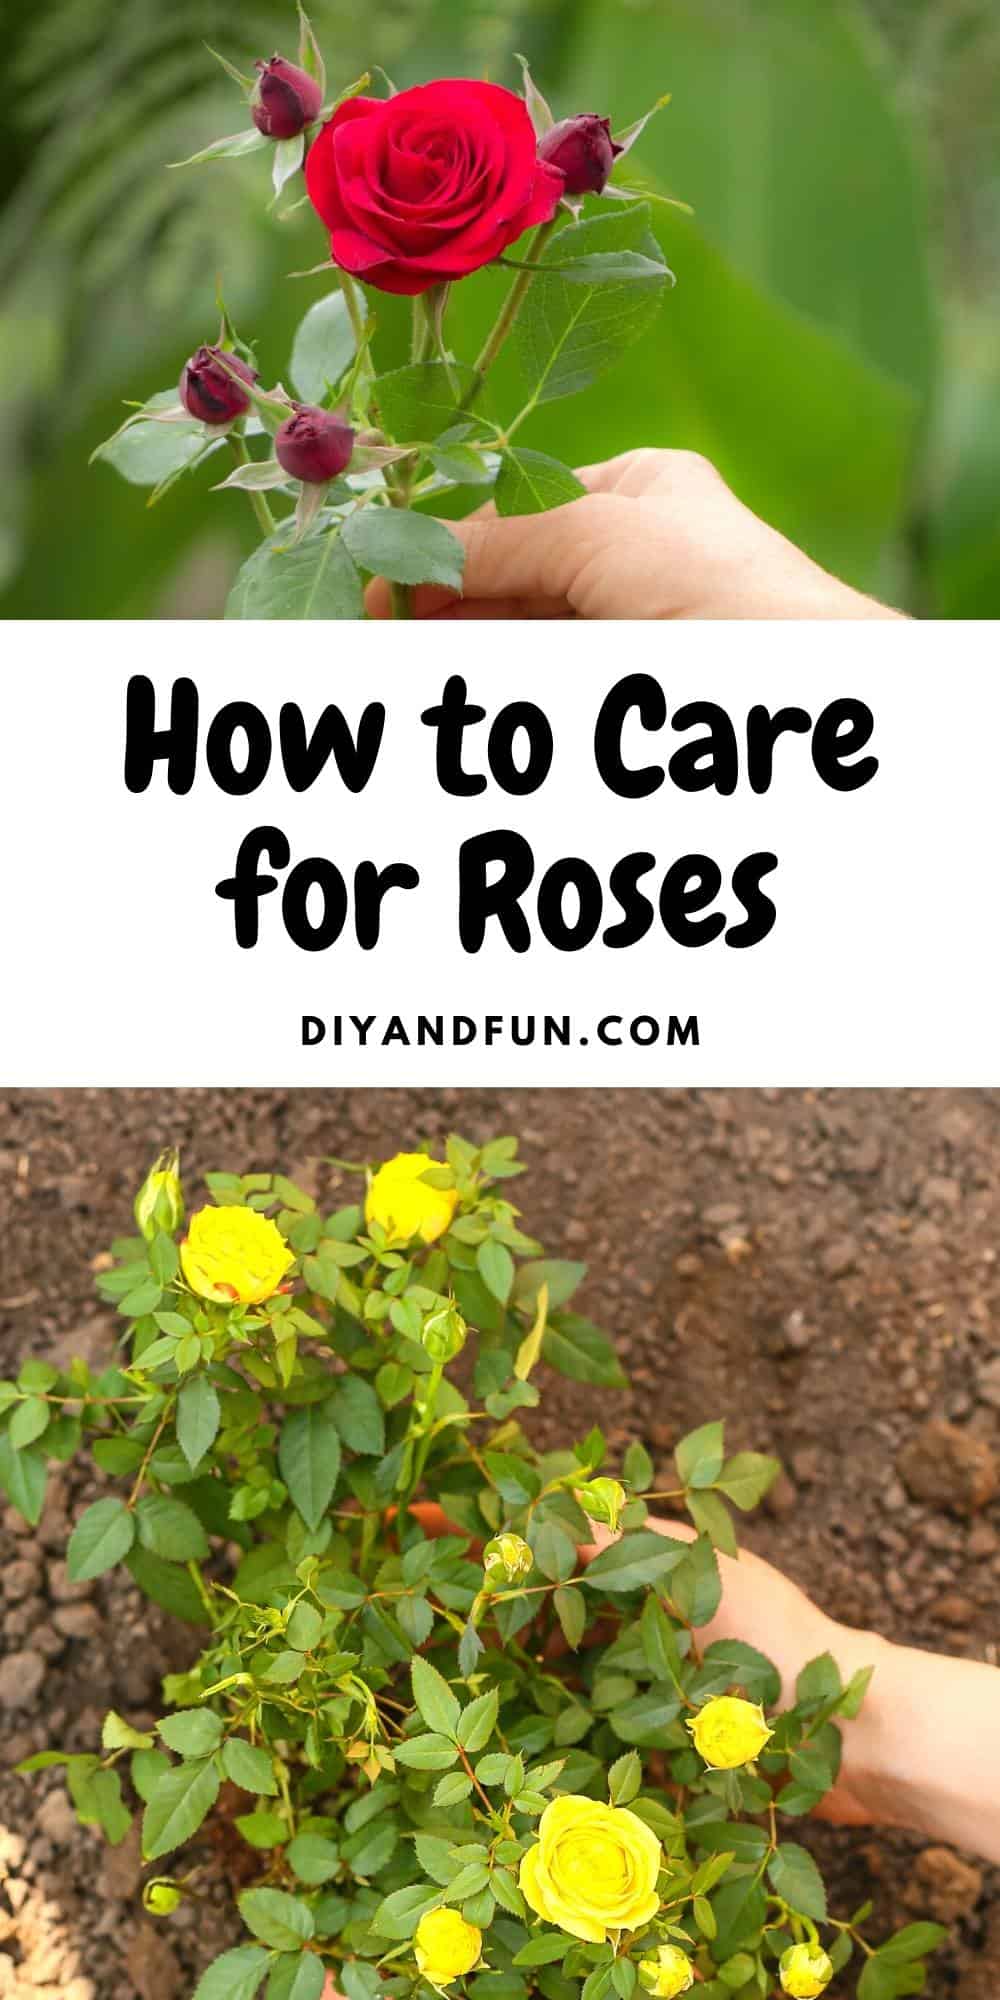 How to Care for Roses, a simple guide for most anyone for maintaining beautiful roses in your garden with minimal effort.